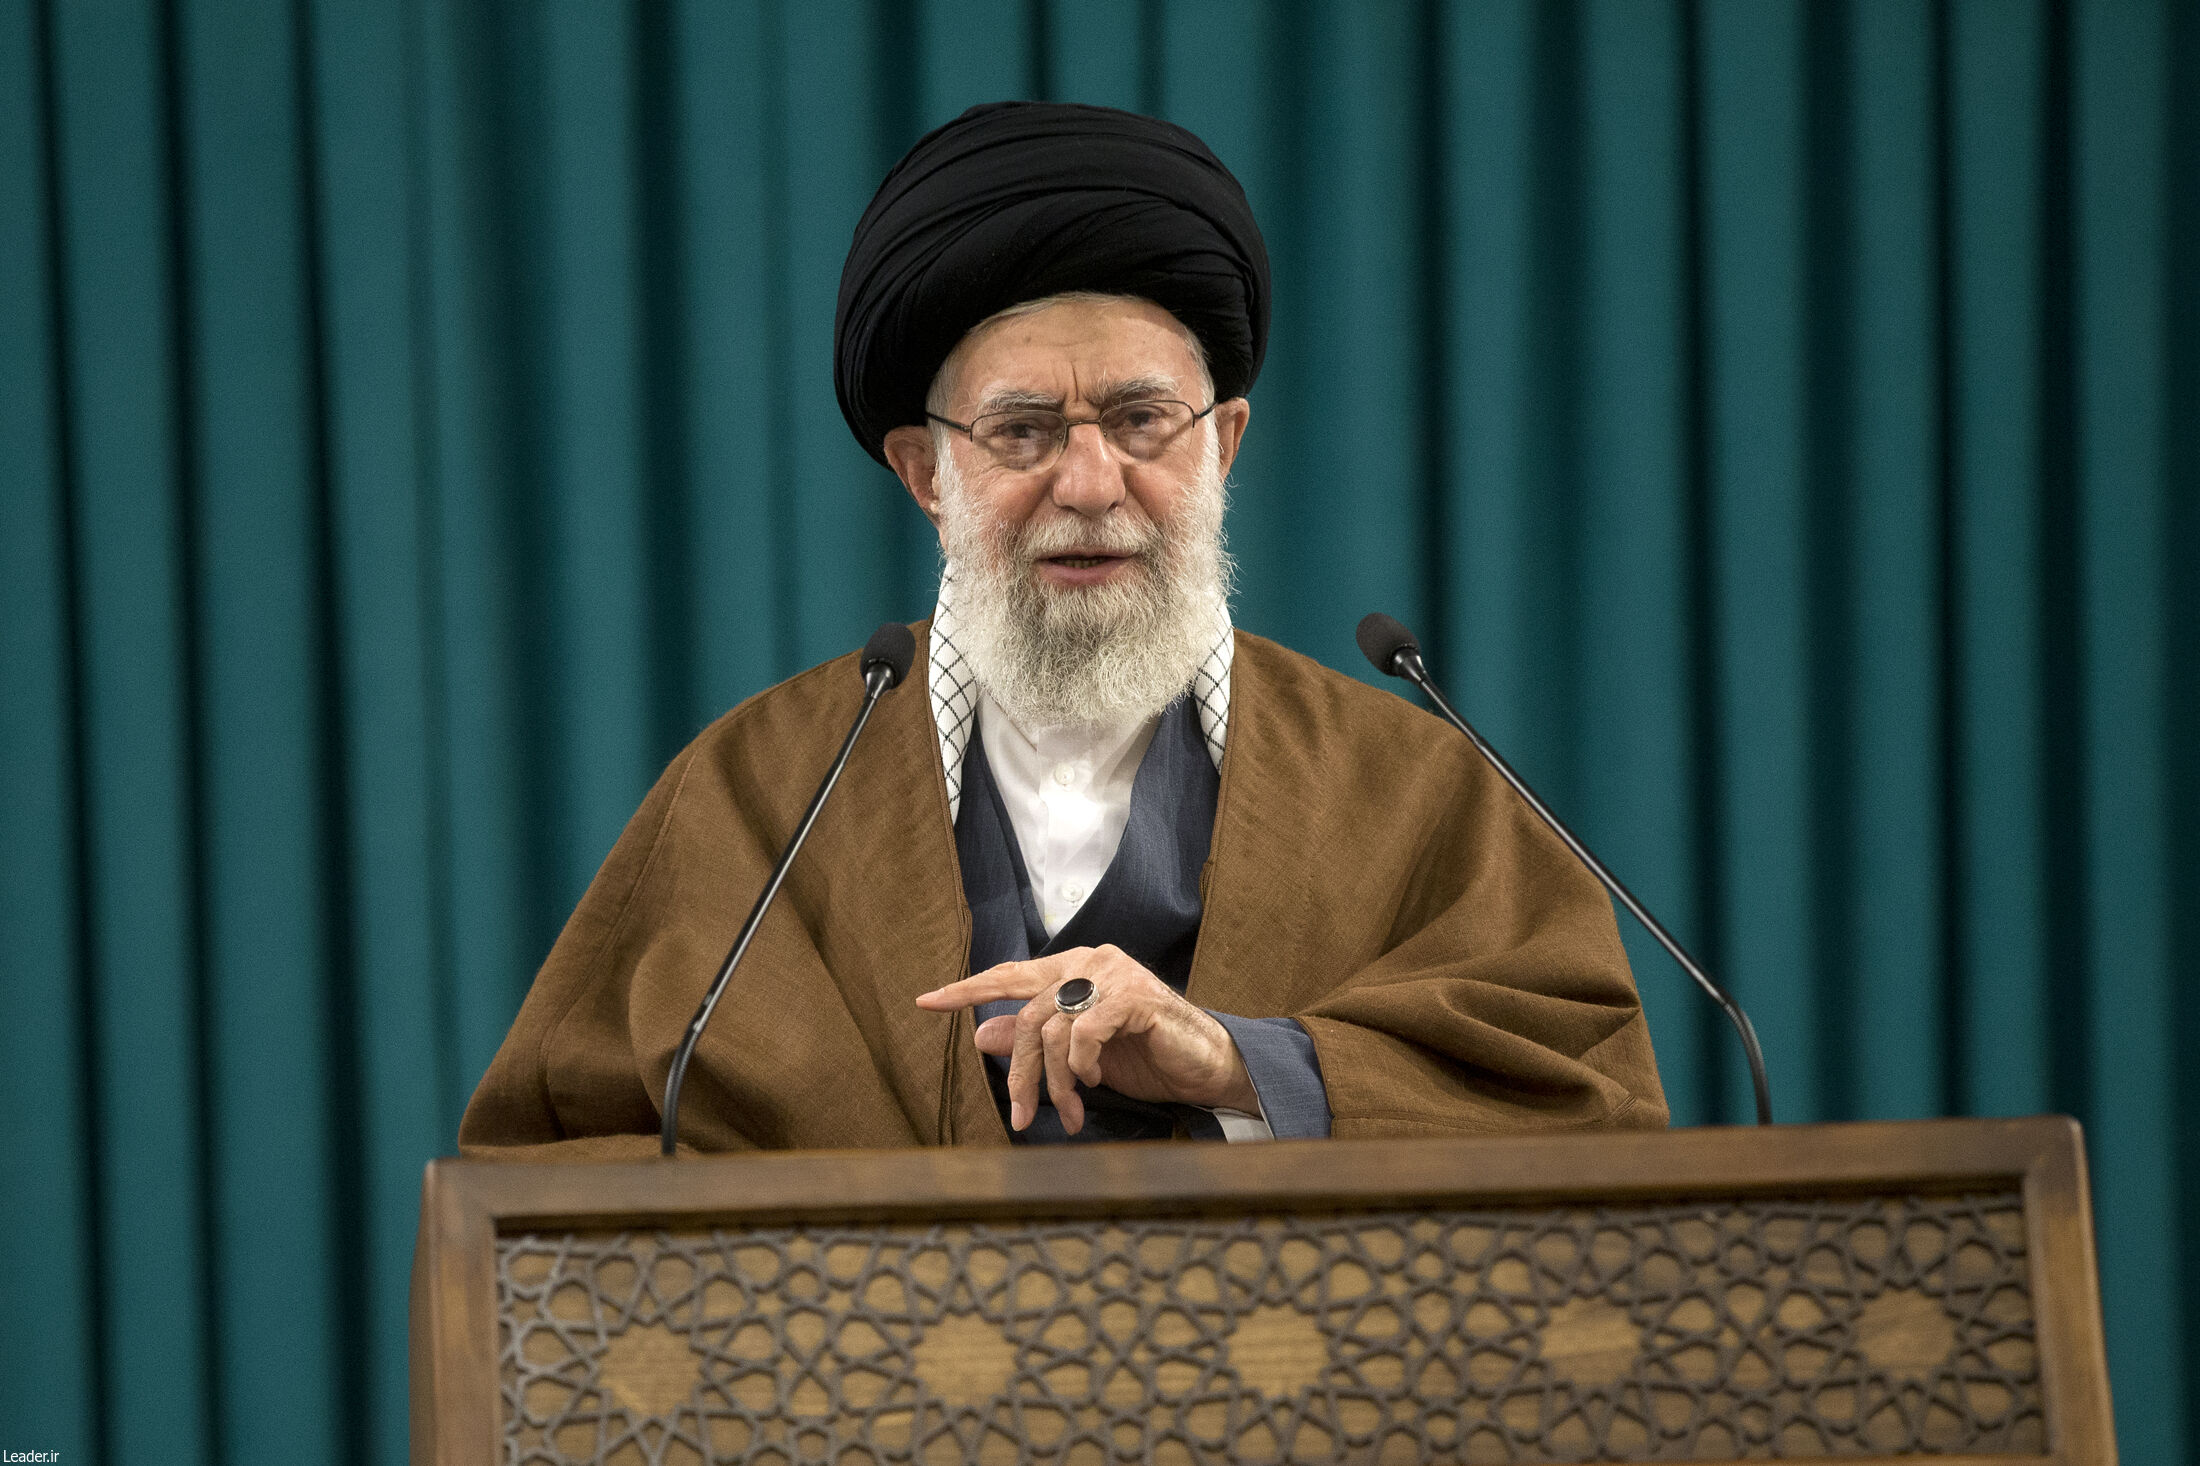 US Dragged Ukraine to Where It Is Now: Iran Leader